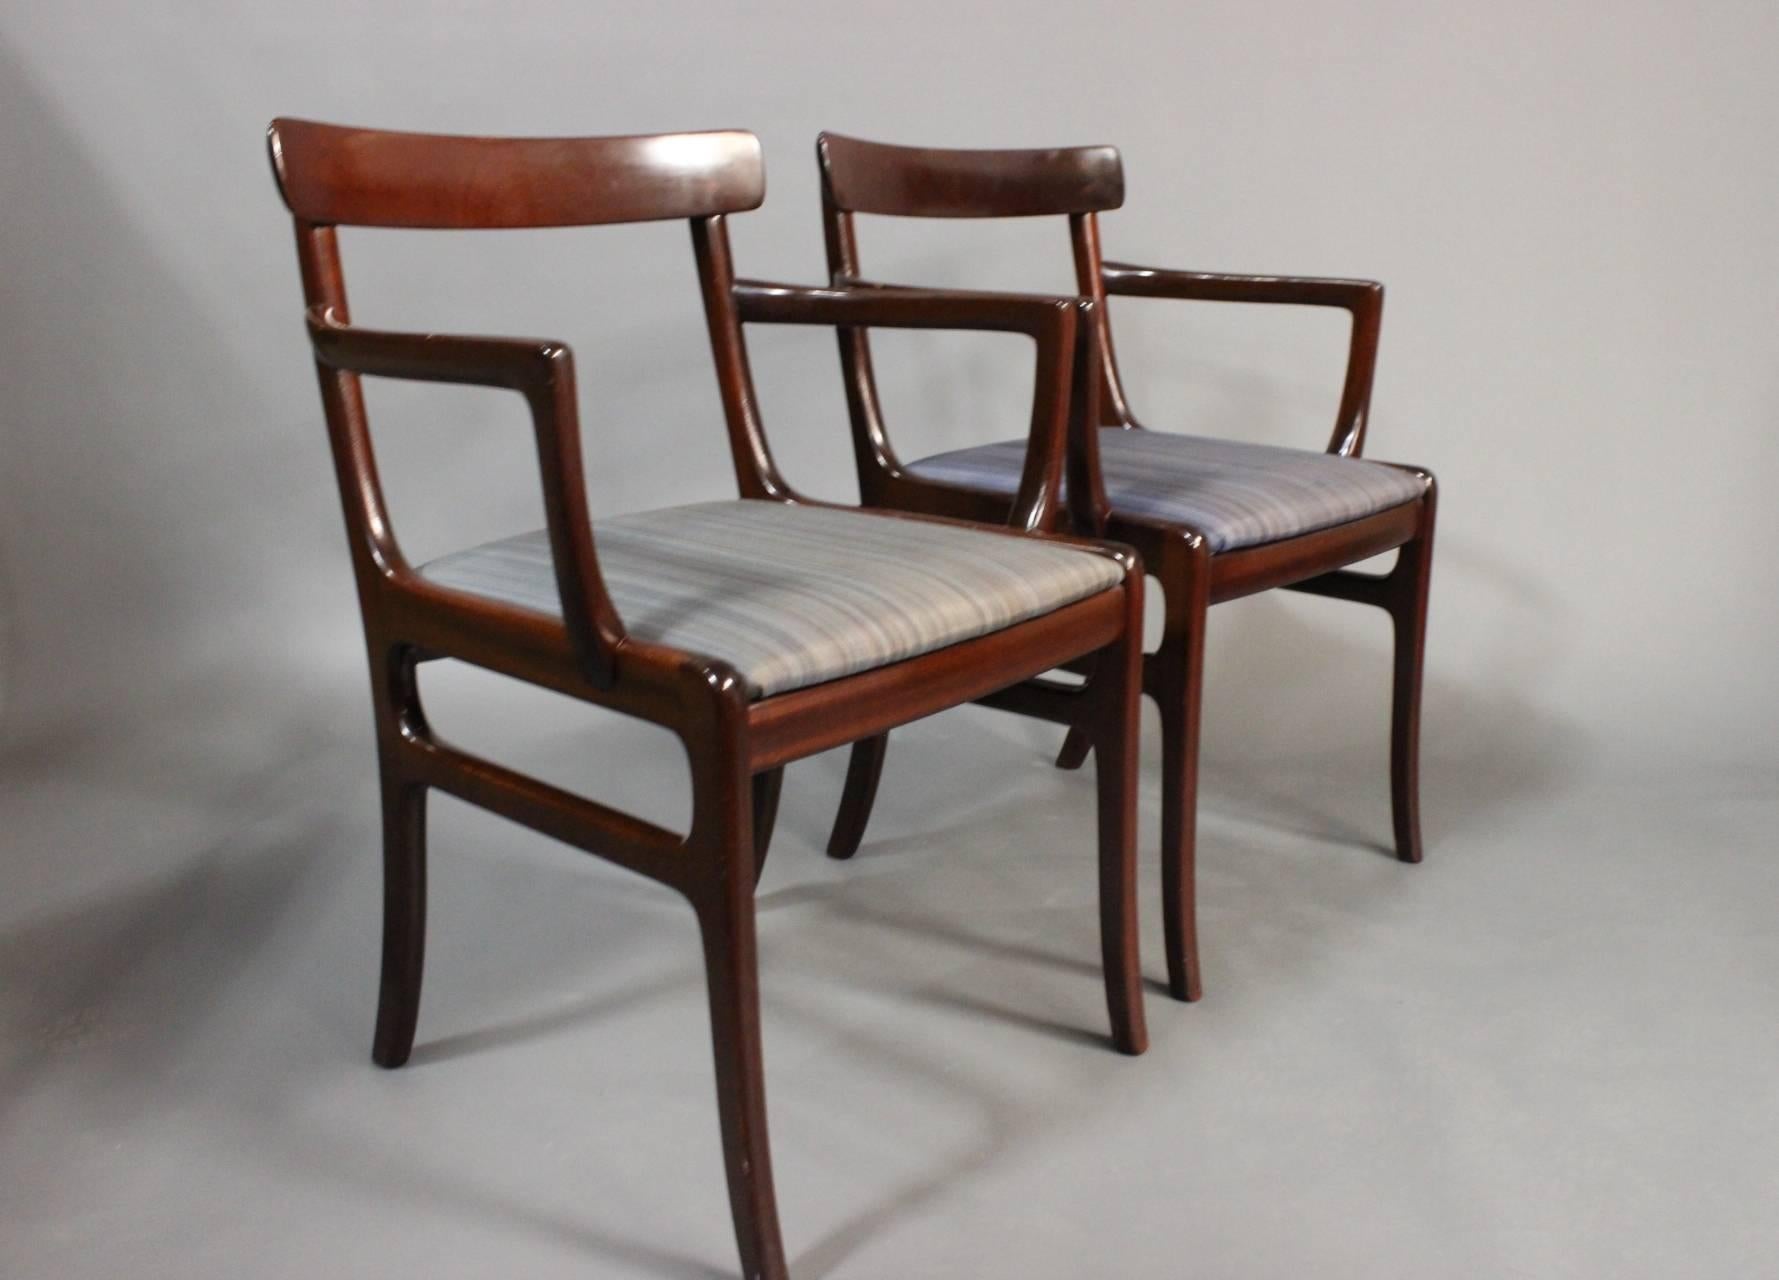 A pair of "Rungstedlund" armchairs in mahogany and uppolstered blue fabric from around the 1940s. The chairs are designed by Ole Wanscher and manufactured by P. Jeppesen. 